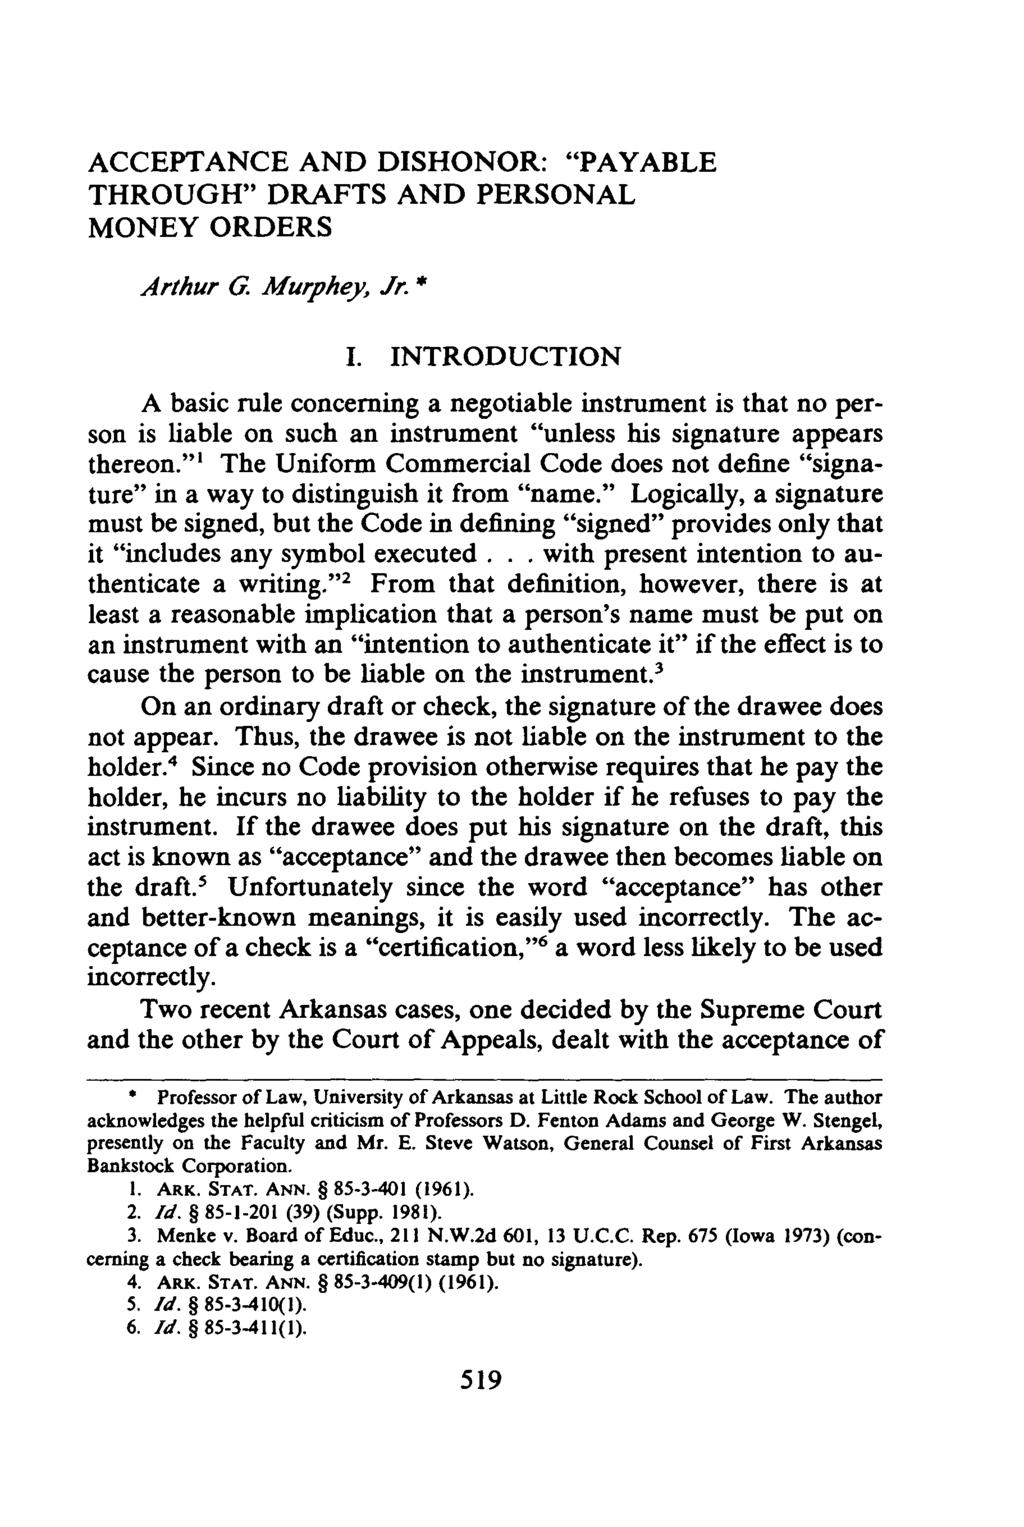 ACCEPTANCE AND DISHONOR: "PAYABLE THROUGH" DRAFTS AND PERSONAL MONEY ORDERS Arthur G. Murphey, Jr. * I.